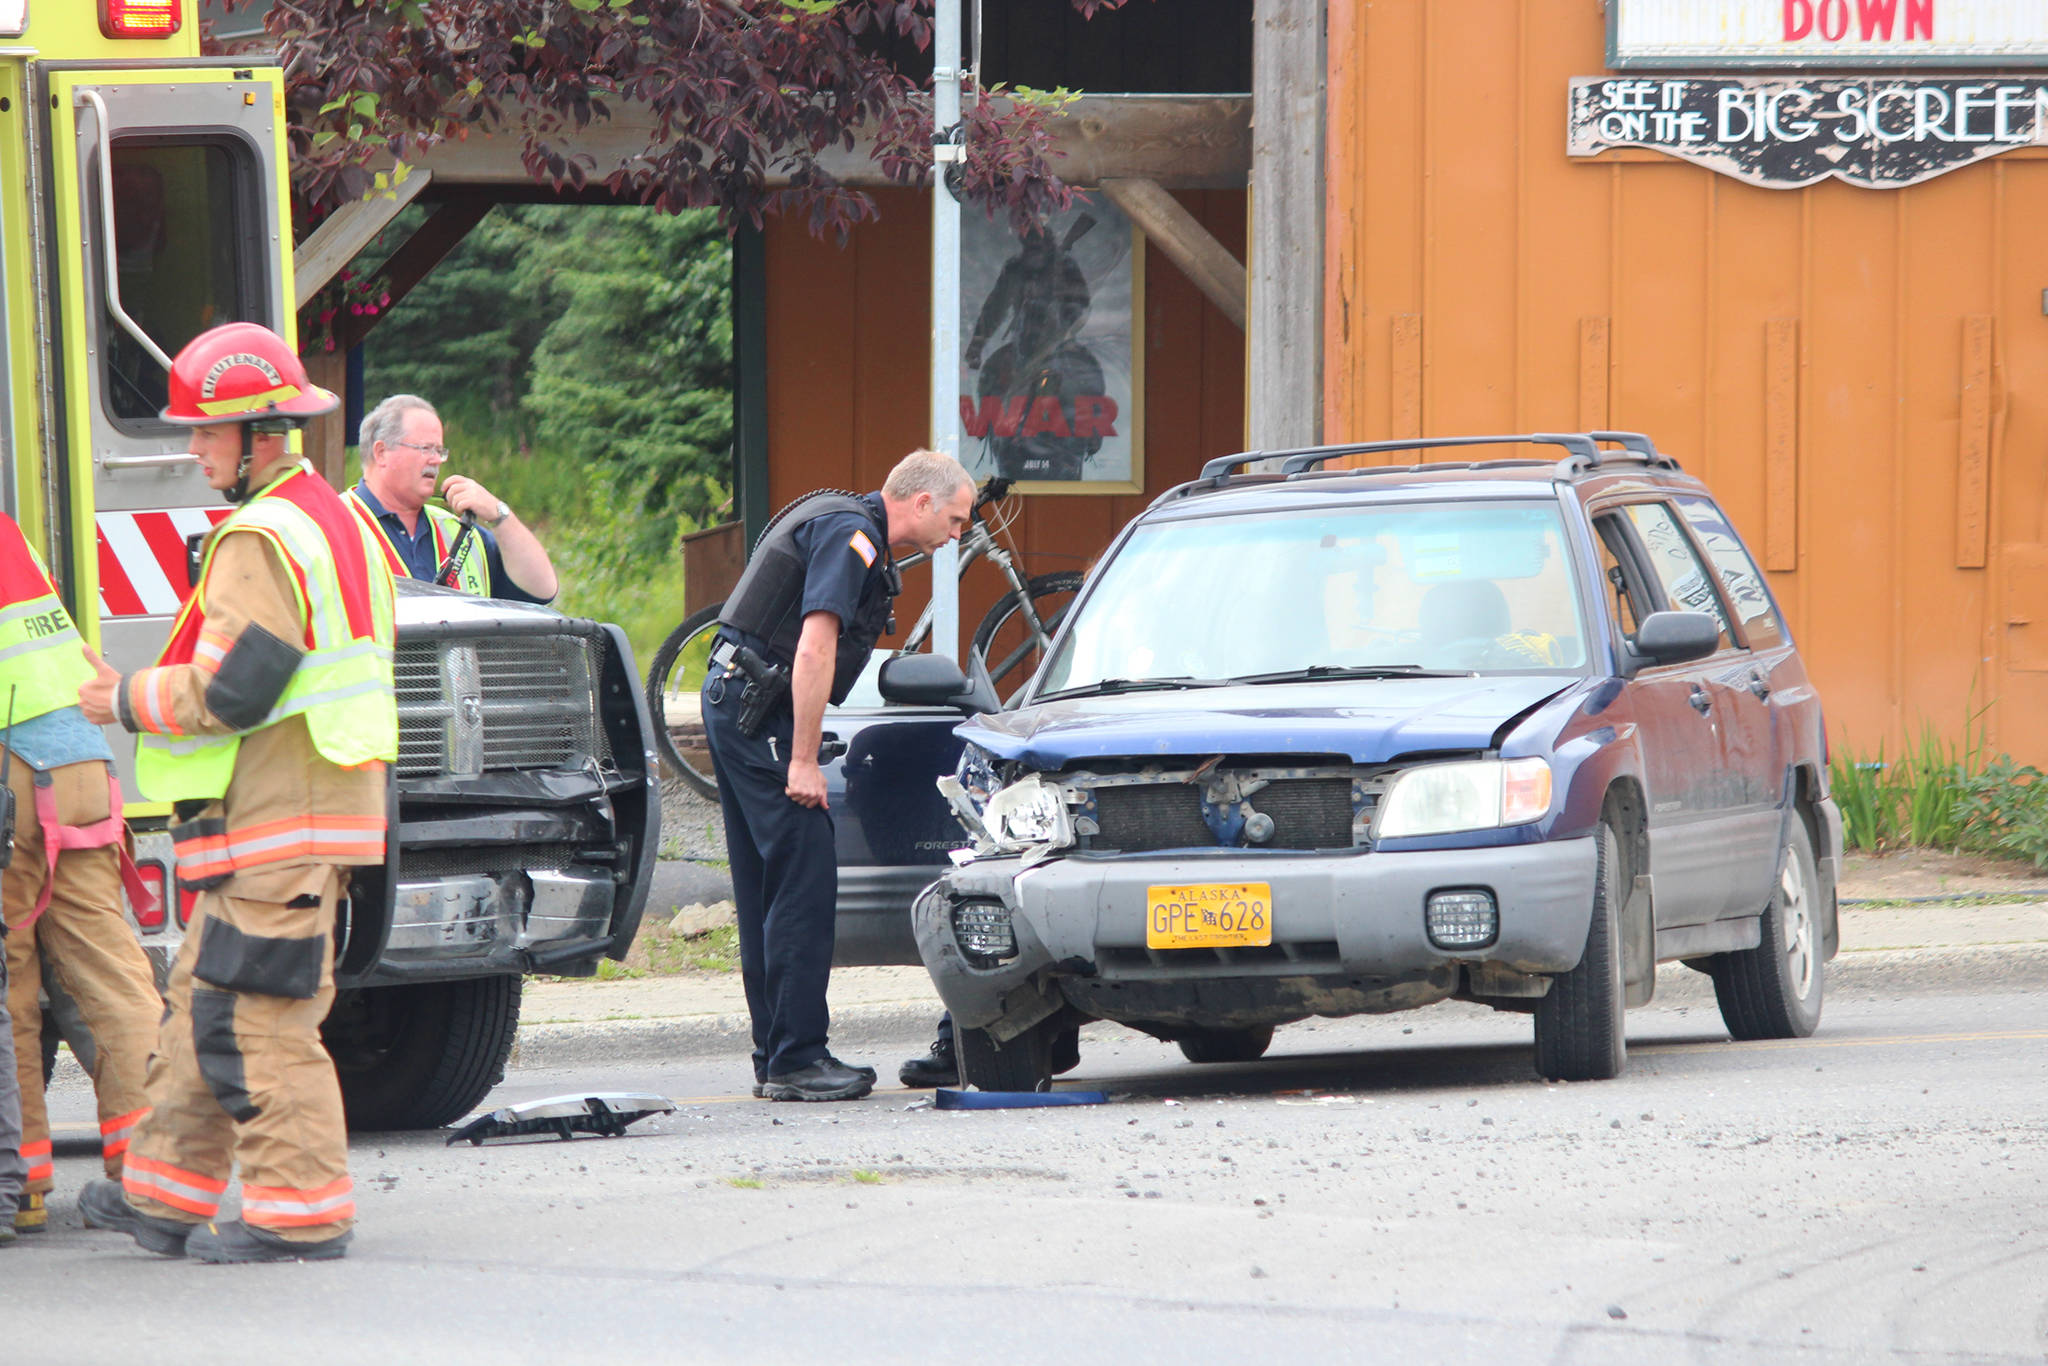 Members of the Homer Police Department and the Homer Volunteer Fire Department investigate the scene of a two-vehicle, head-on crash between a black pickup truck and a navy blue Subaru on Tuesday, July 25, 2017 at the intersection of Pioneer Avenue and Main Street in Homer, Alaska. One woman, the driver of the Subaru, was taken from the scene in an ambulance. The pickup was driven from the scene. Photo by Megan Pacer/Homer News